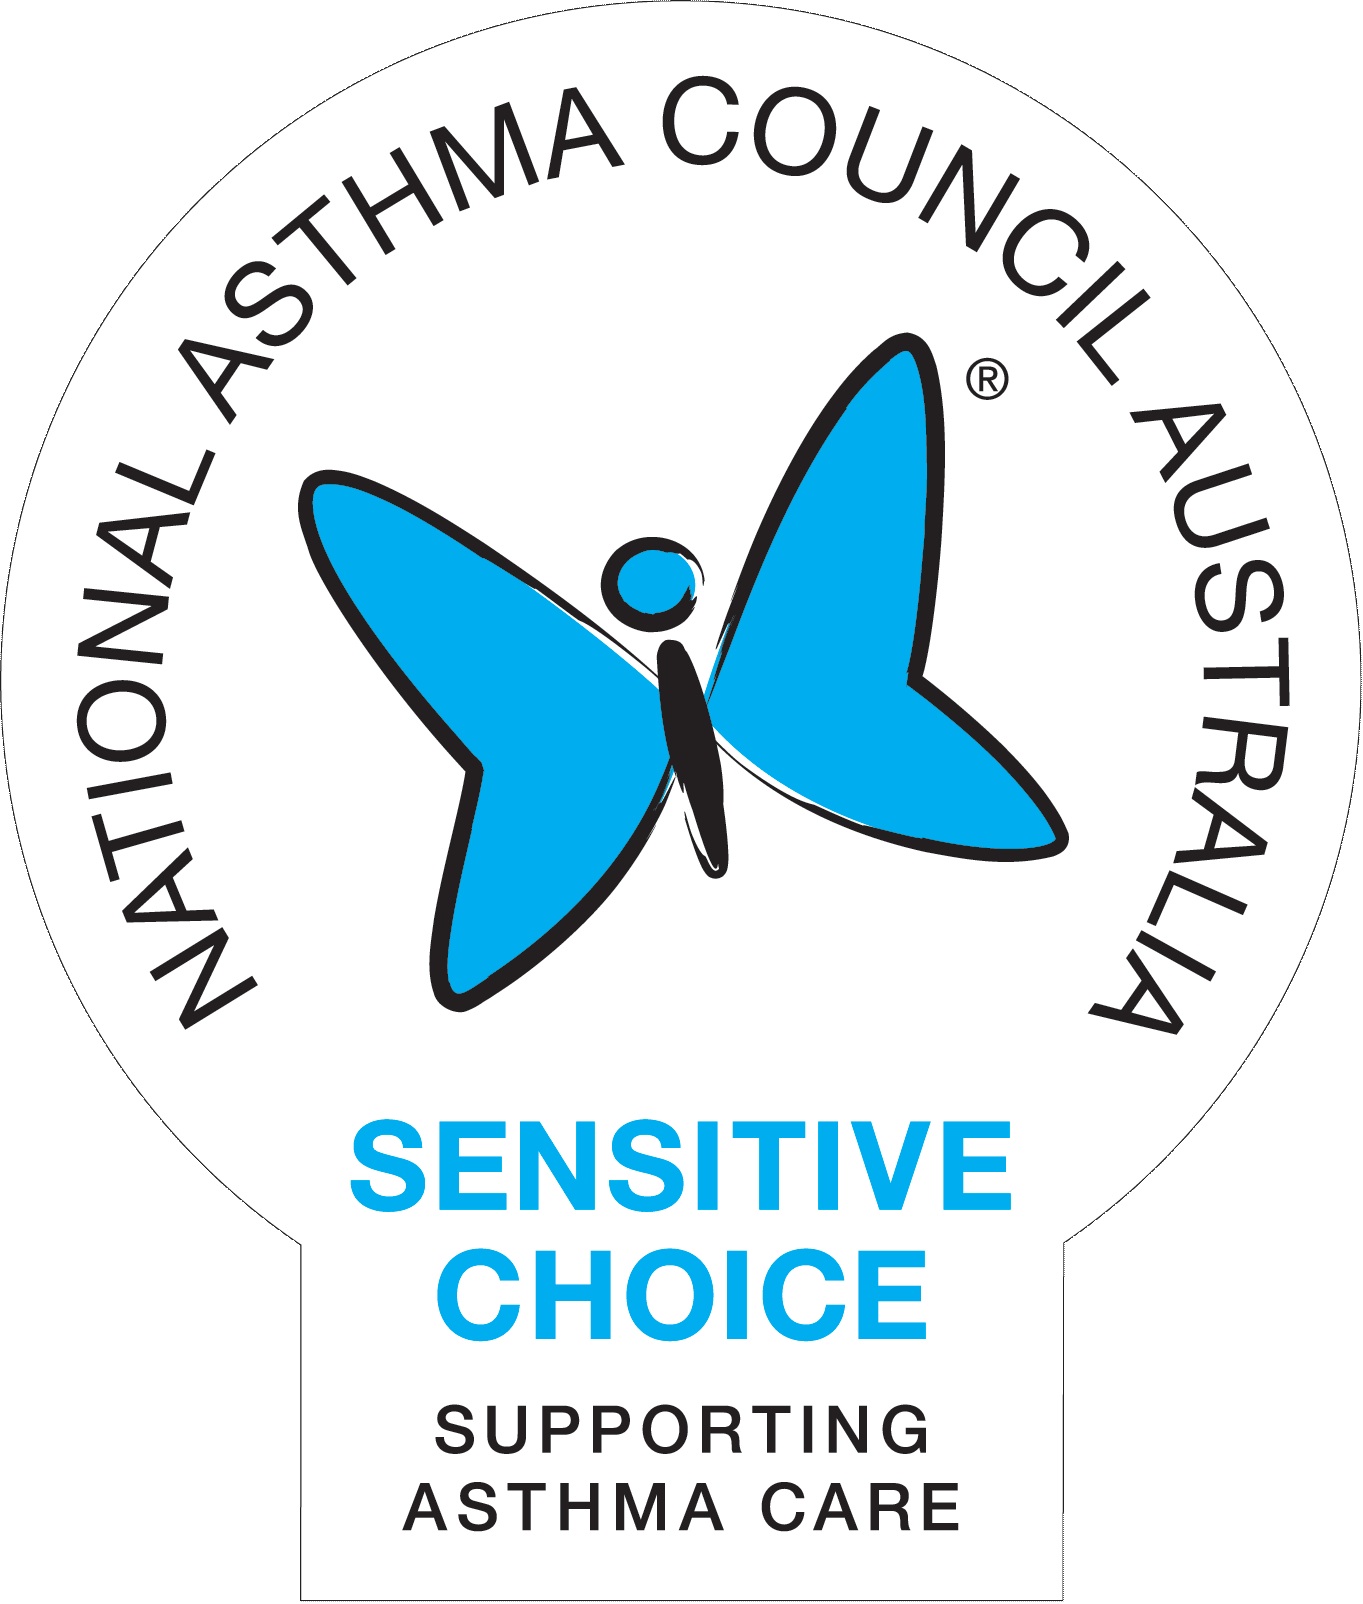 National Asthma Council Approved